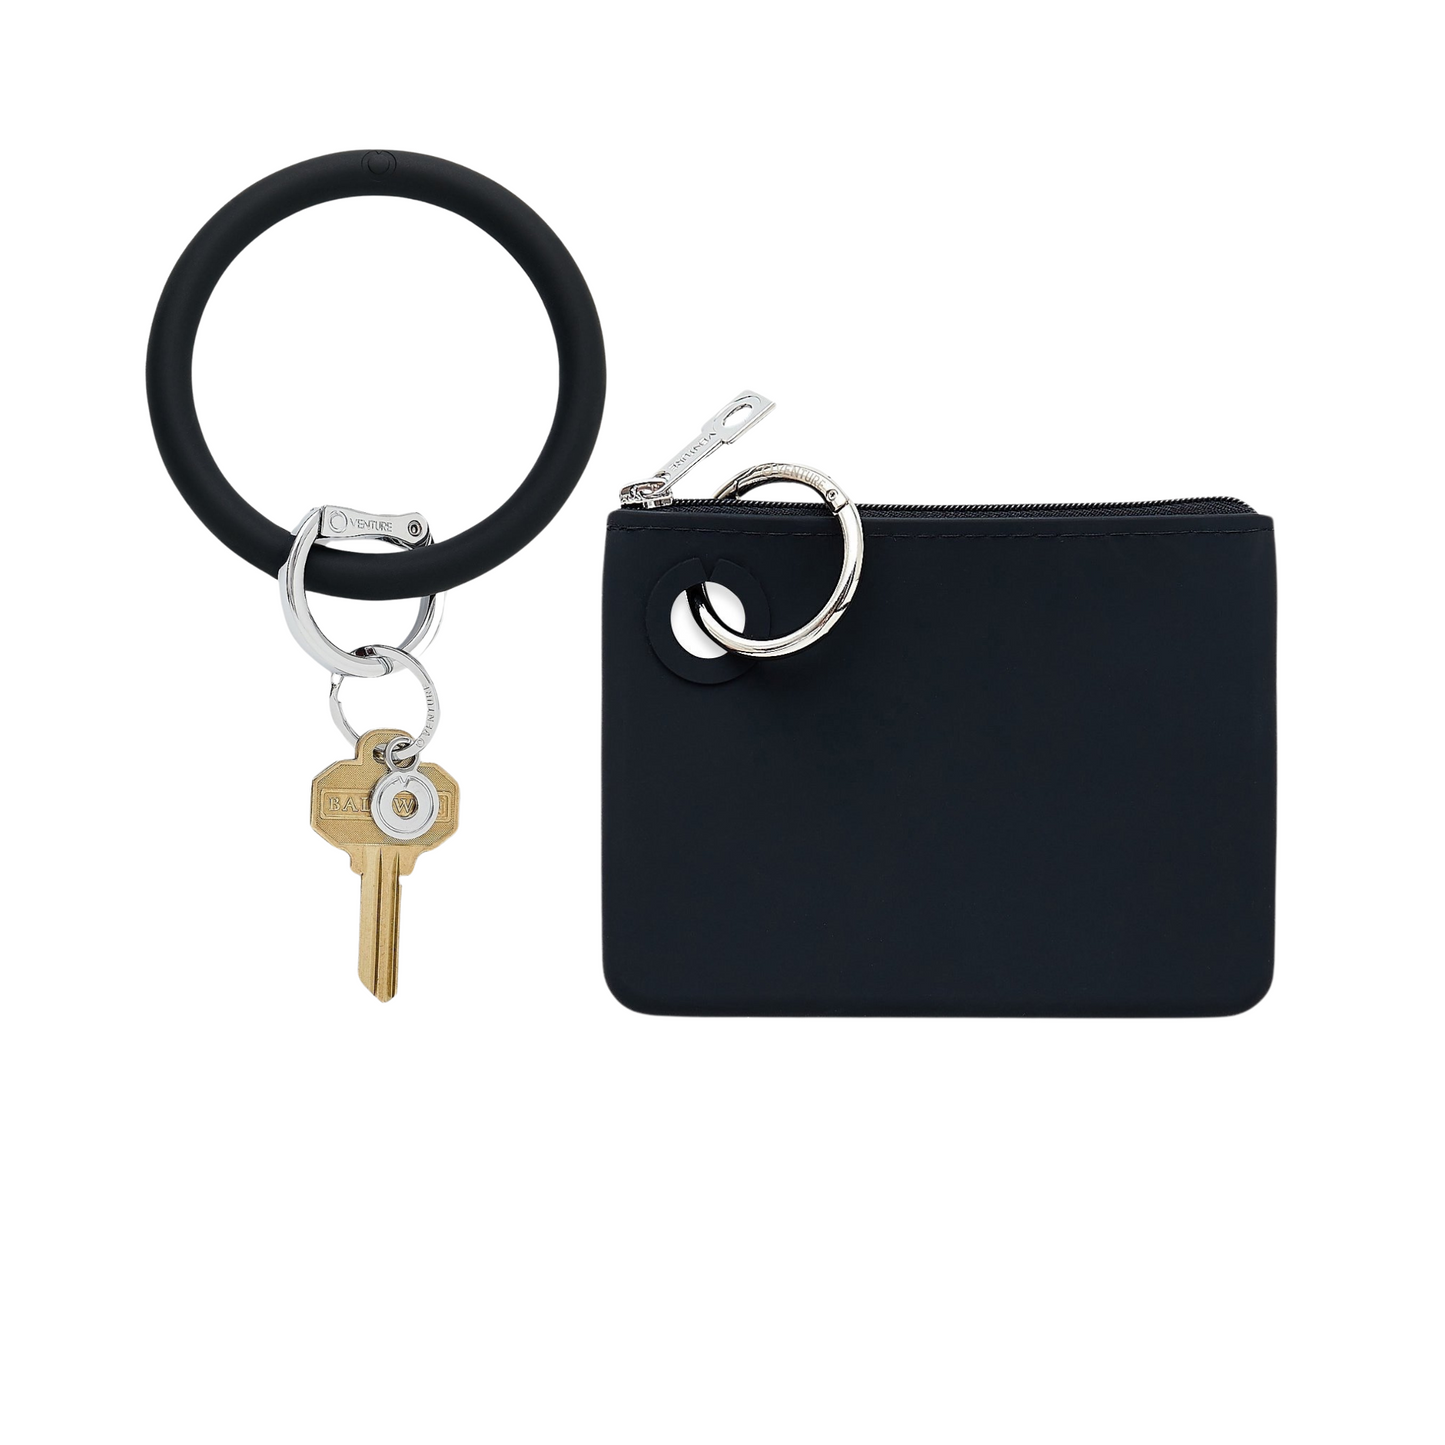 Shop the Black Mini Pouch Wristlet, a stylish and functional accessory made of smooth silicone.